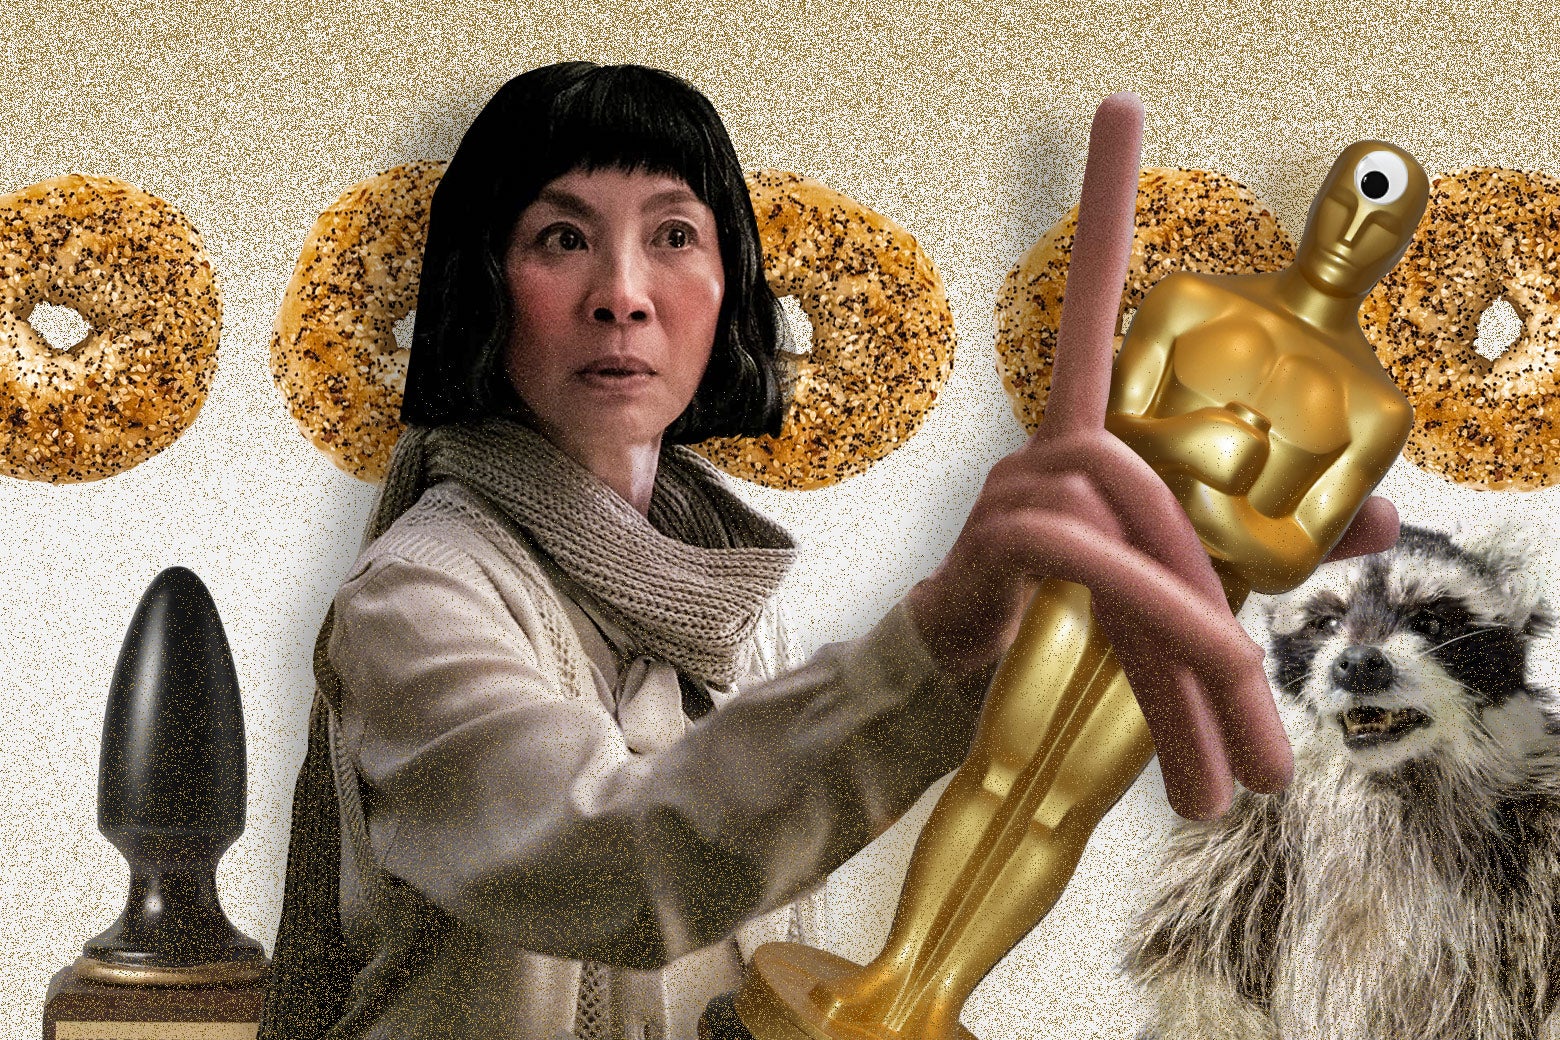 Everything Everywhere All at Once’s Michelle Yeoh, with hot dog fingers, holds an Oscar that has a googly-eye on its forehead. Behind her, everything bagels, butt plugs, and raccoons.